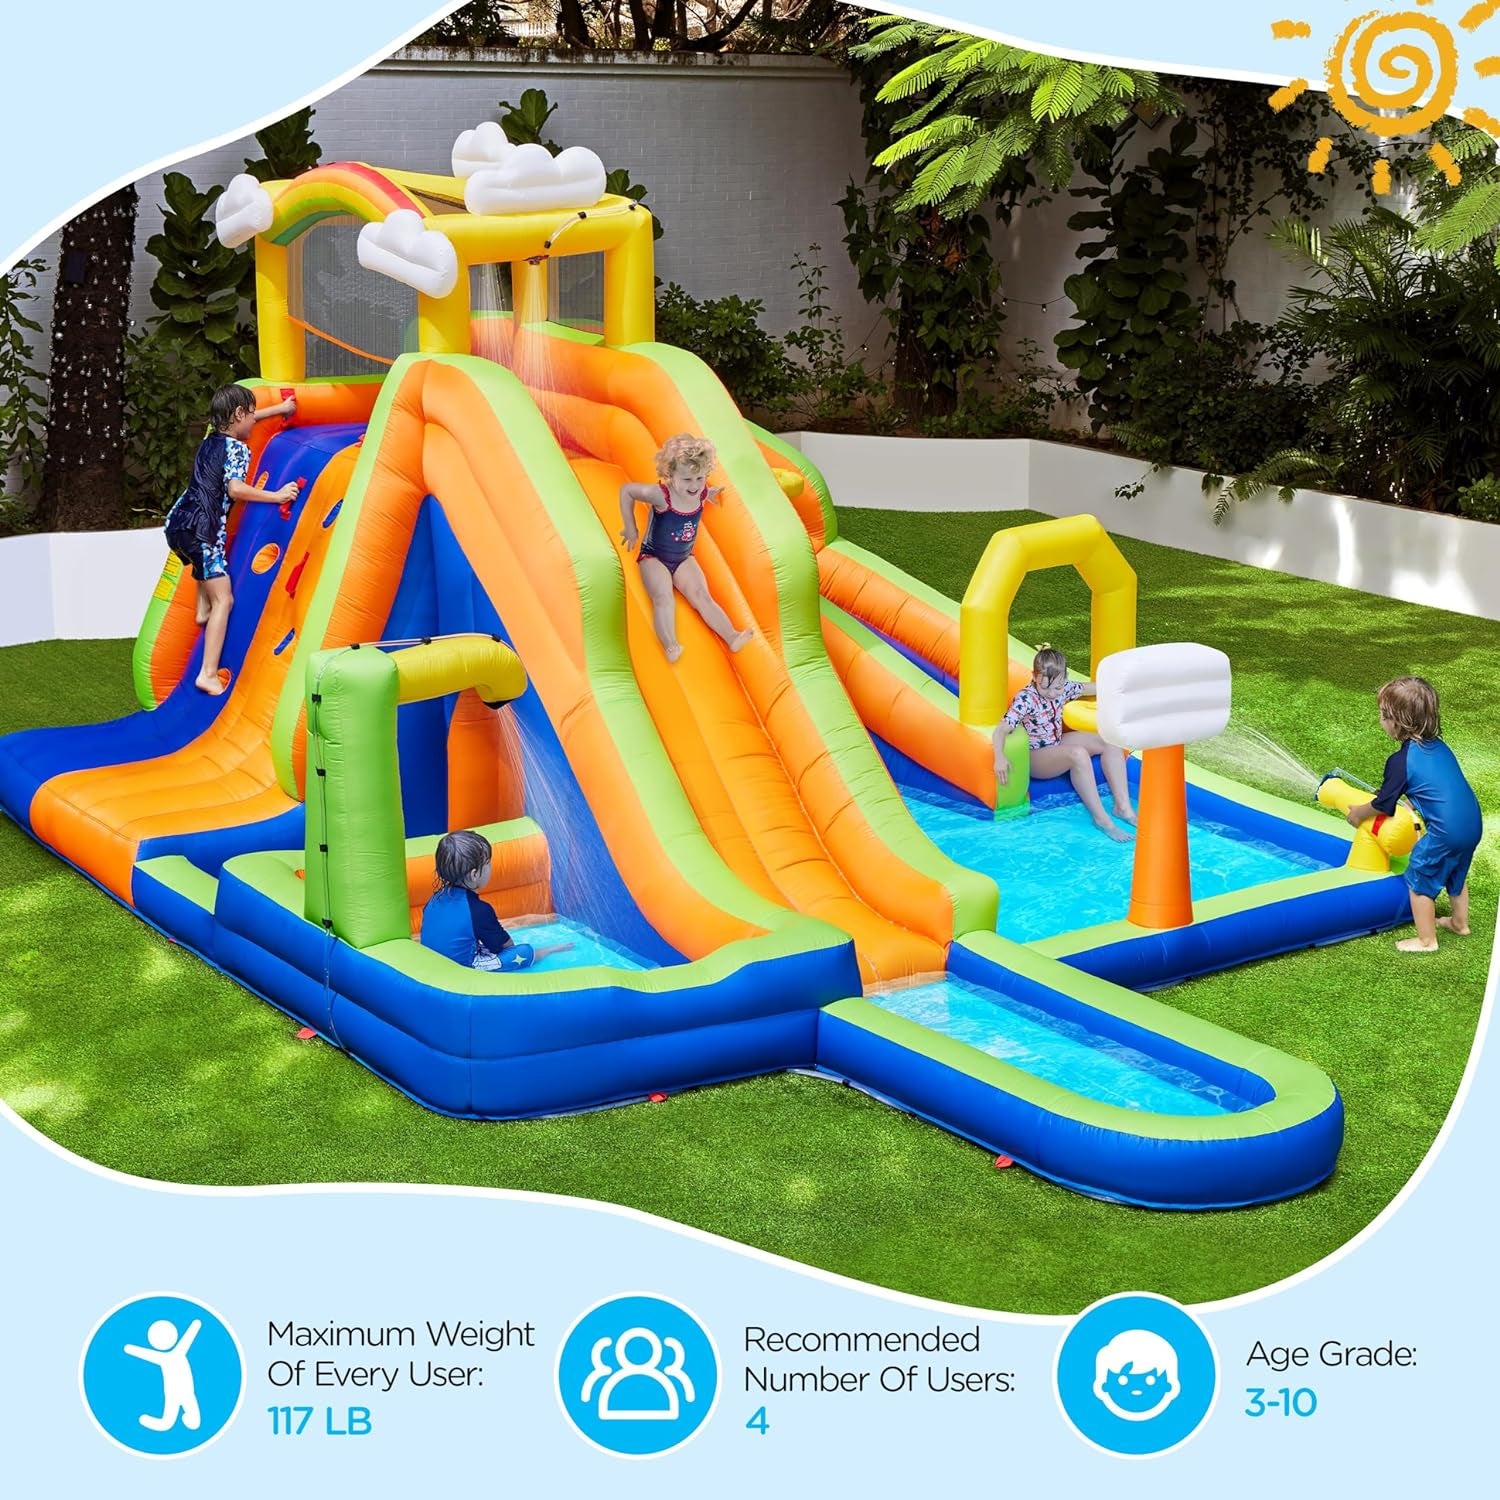 Inflatable Water Slide, 10-In-1 Rainbow & Clouds Style Water Slide Combo W/ 2 Pools & Large Climbing Wall & Tunnel, Double Lane Water Slide for Kids Aged 3-10 W/Storage Bag & 650W Blower